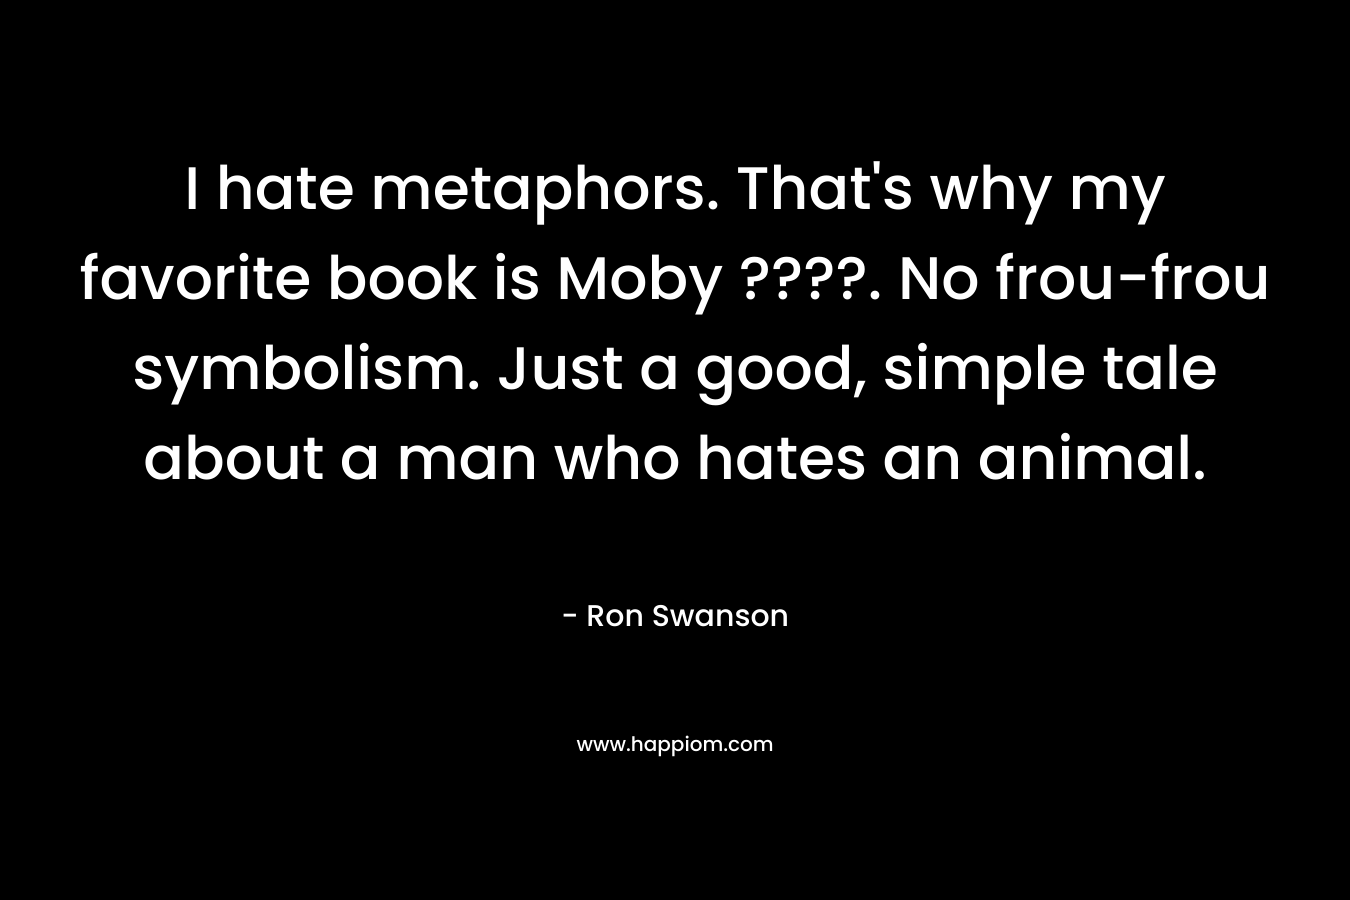 I hate metaphors. That’s why my favorite book is Moby ????. No frou-frou symbolism. Just a good, simple tale about a man who hates an animal. – Ron Swanson